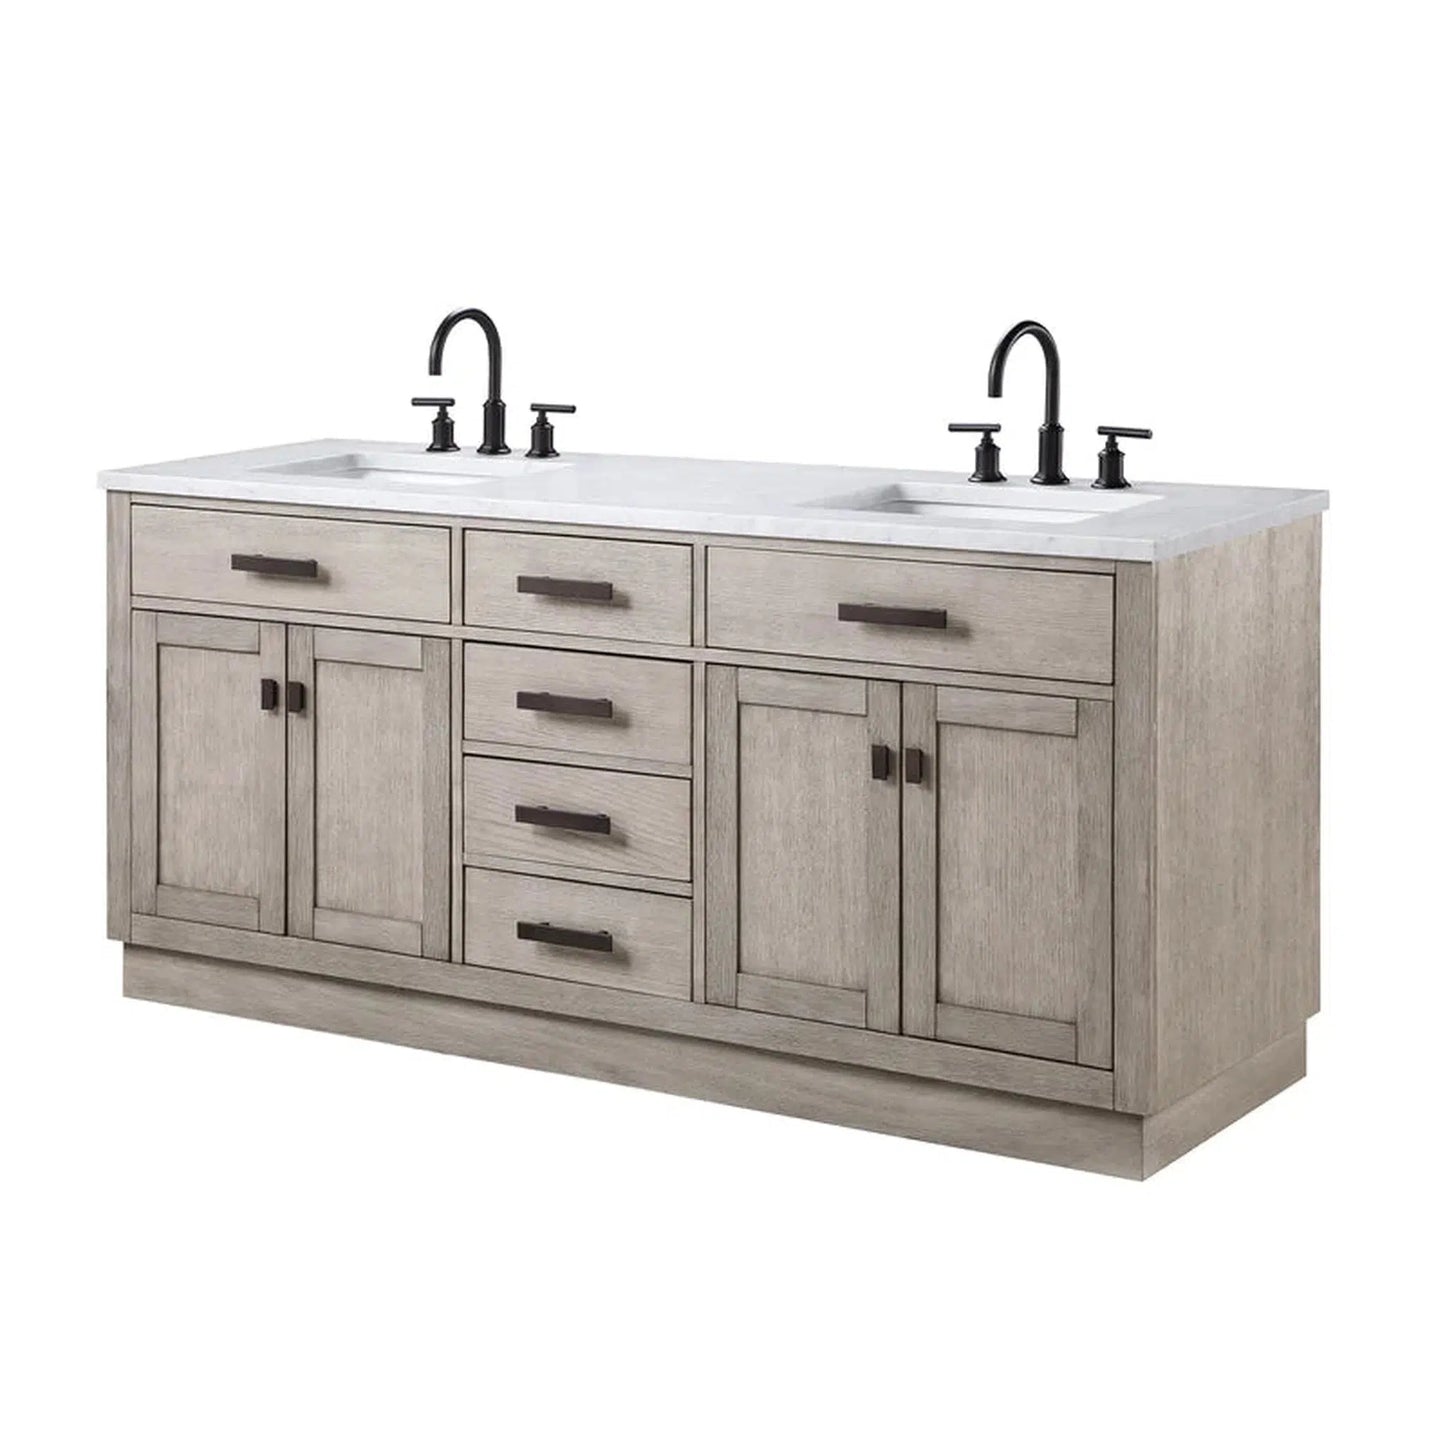 Water Creation Chestnut 72" Double Sink Carrara White Marble Countertop Vanity In Grey Oak with Mirrors